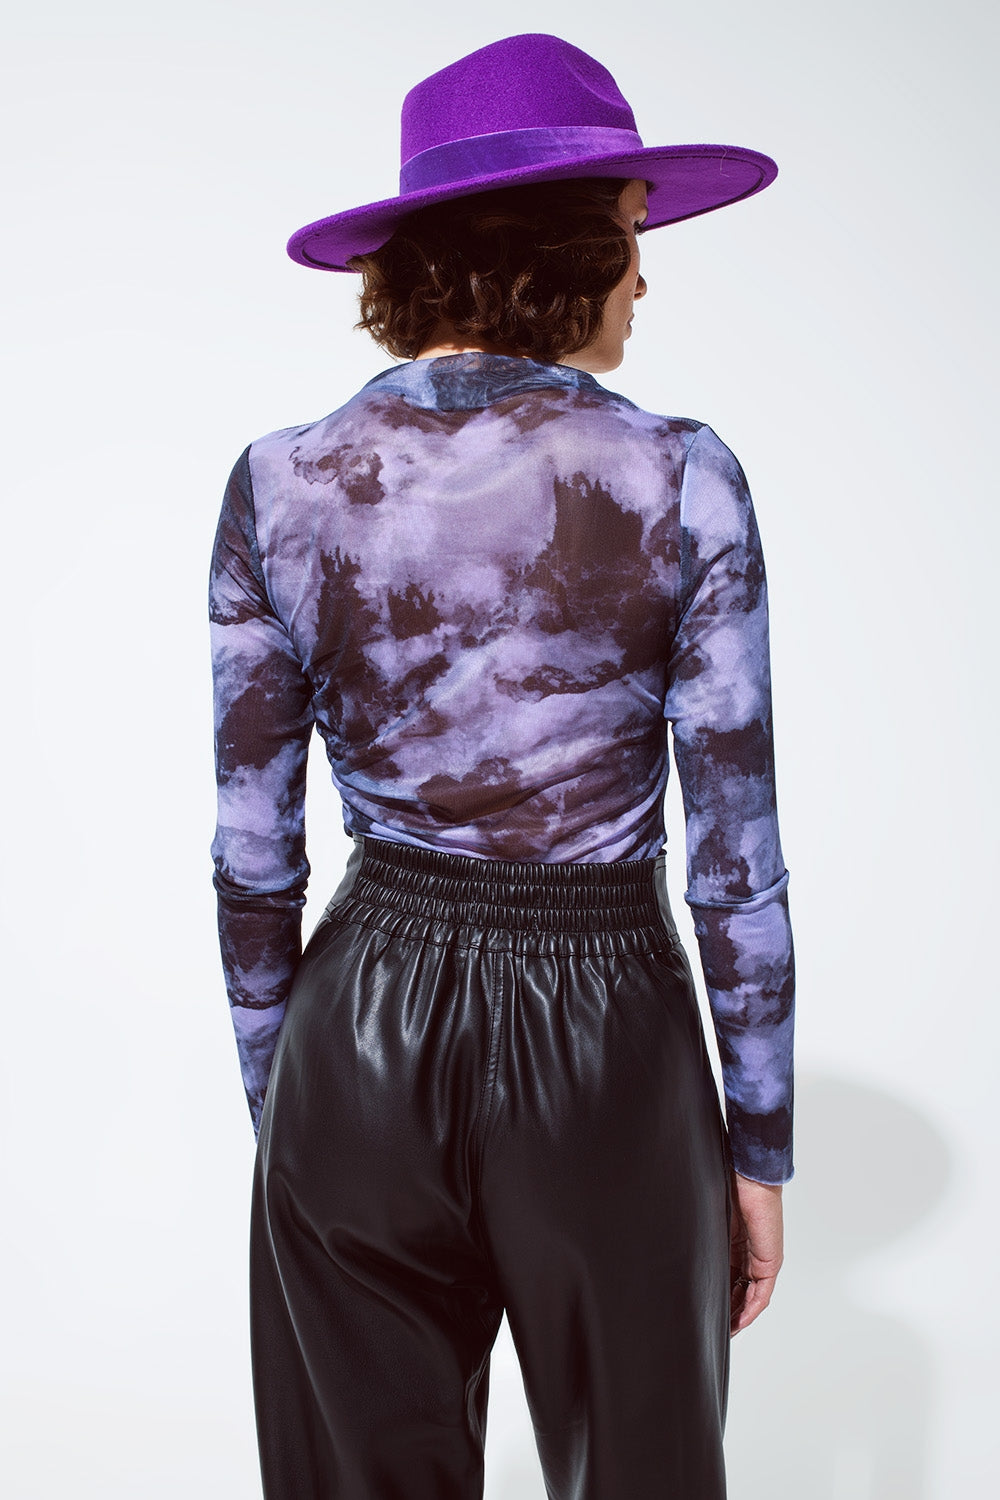 Mesh top cinched at the side with an abstract purple print